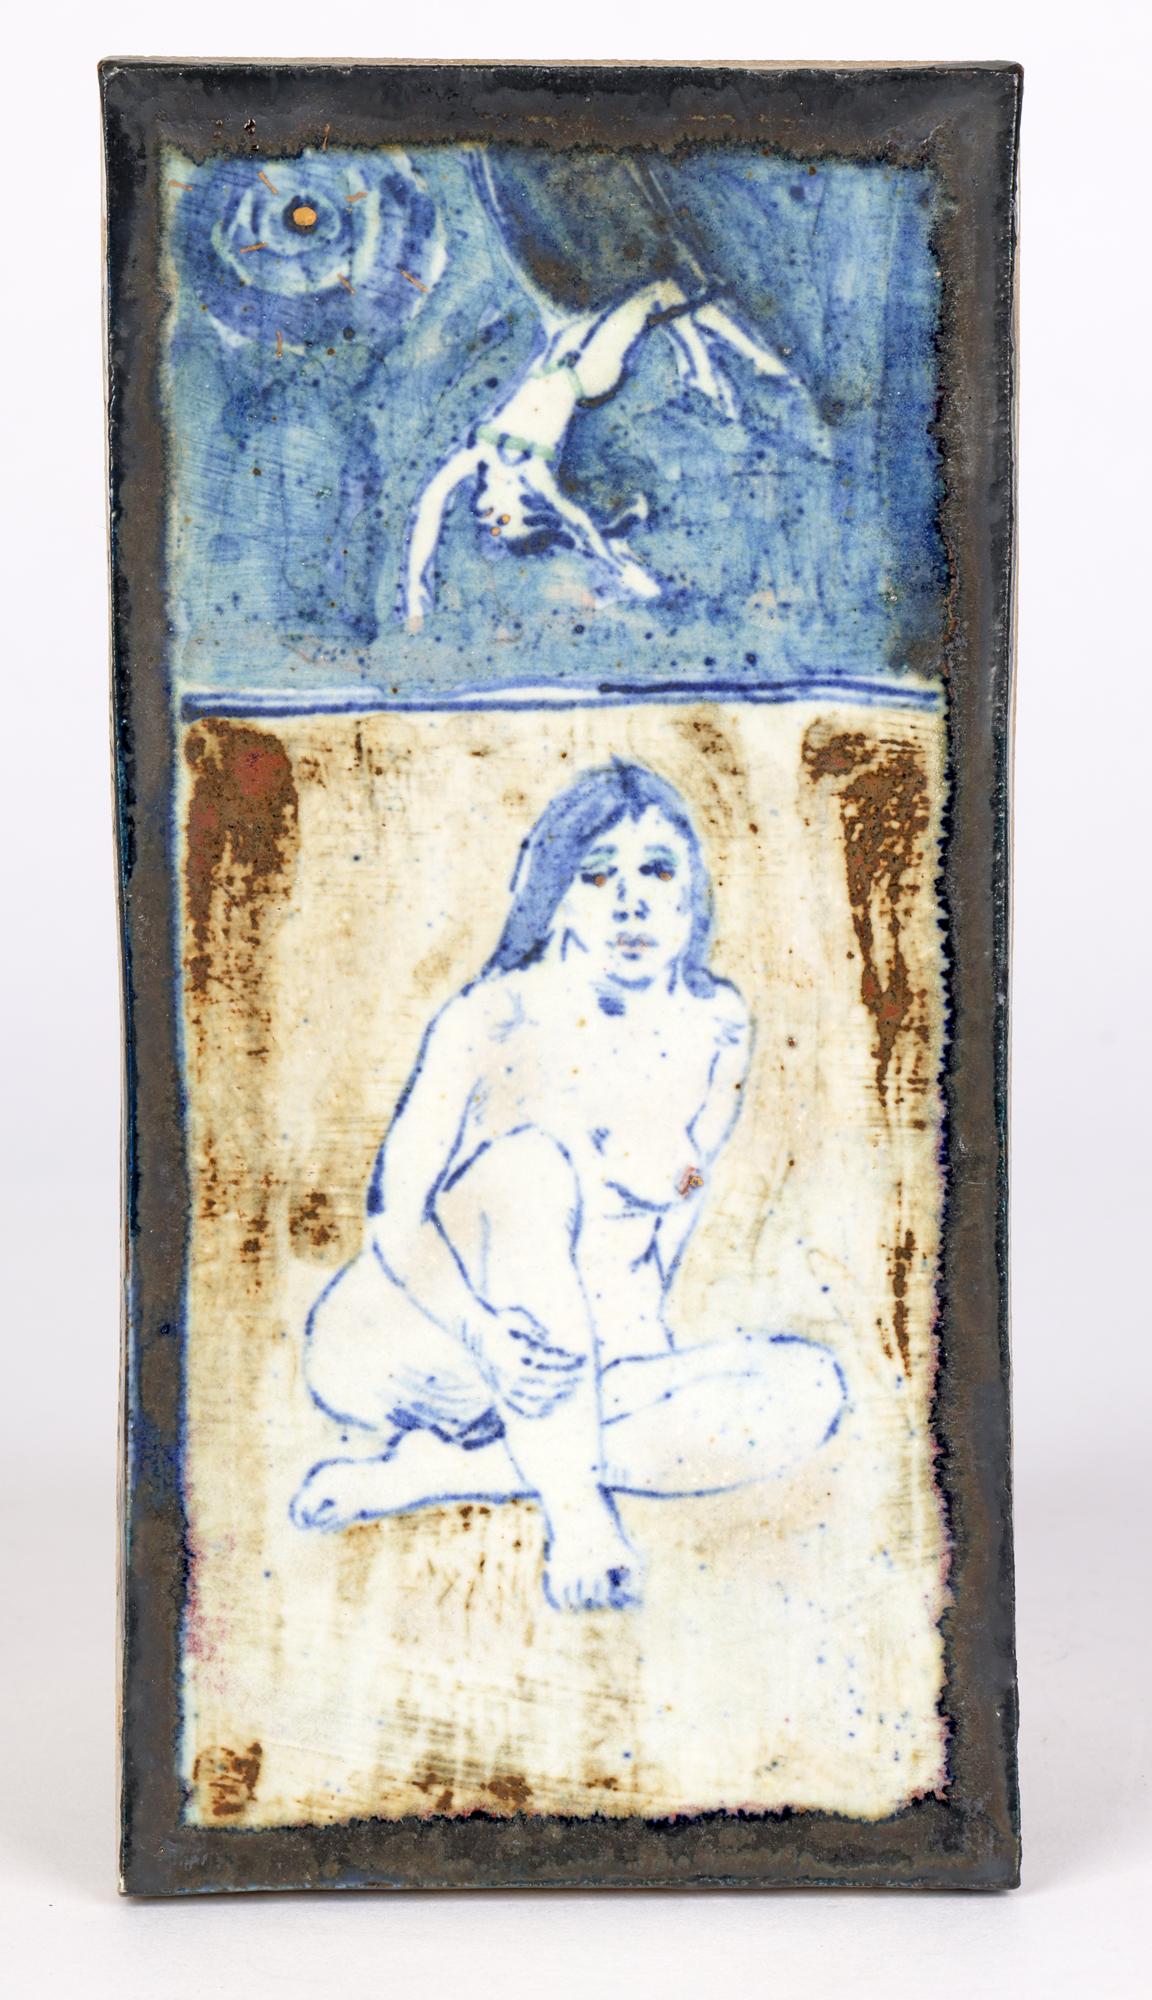 Modern Eric James Mellon Studio Pottery Tile with Nude Titled Circus Trapeze